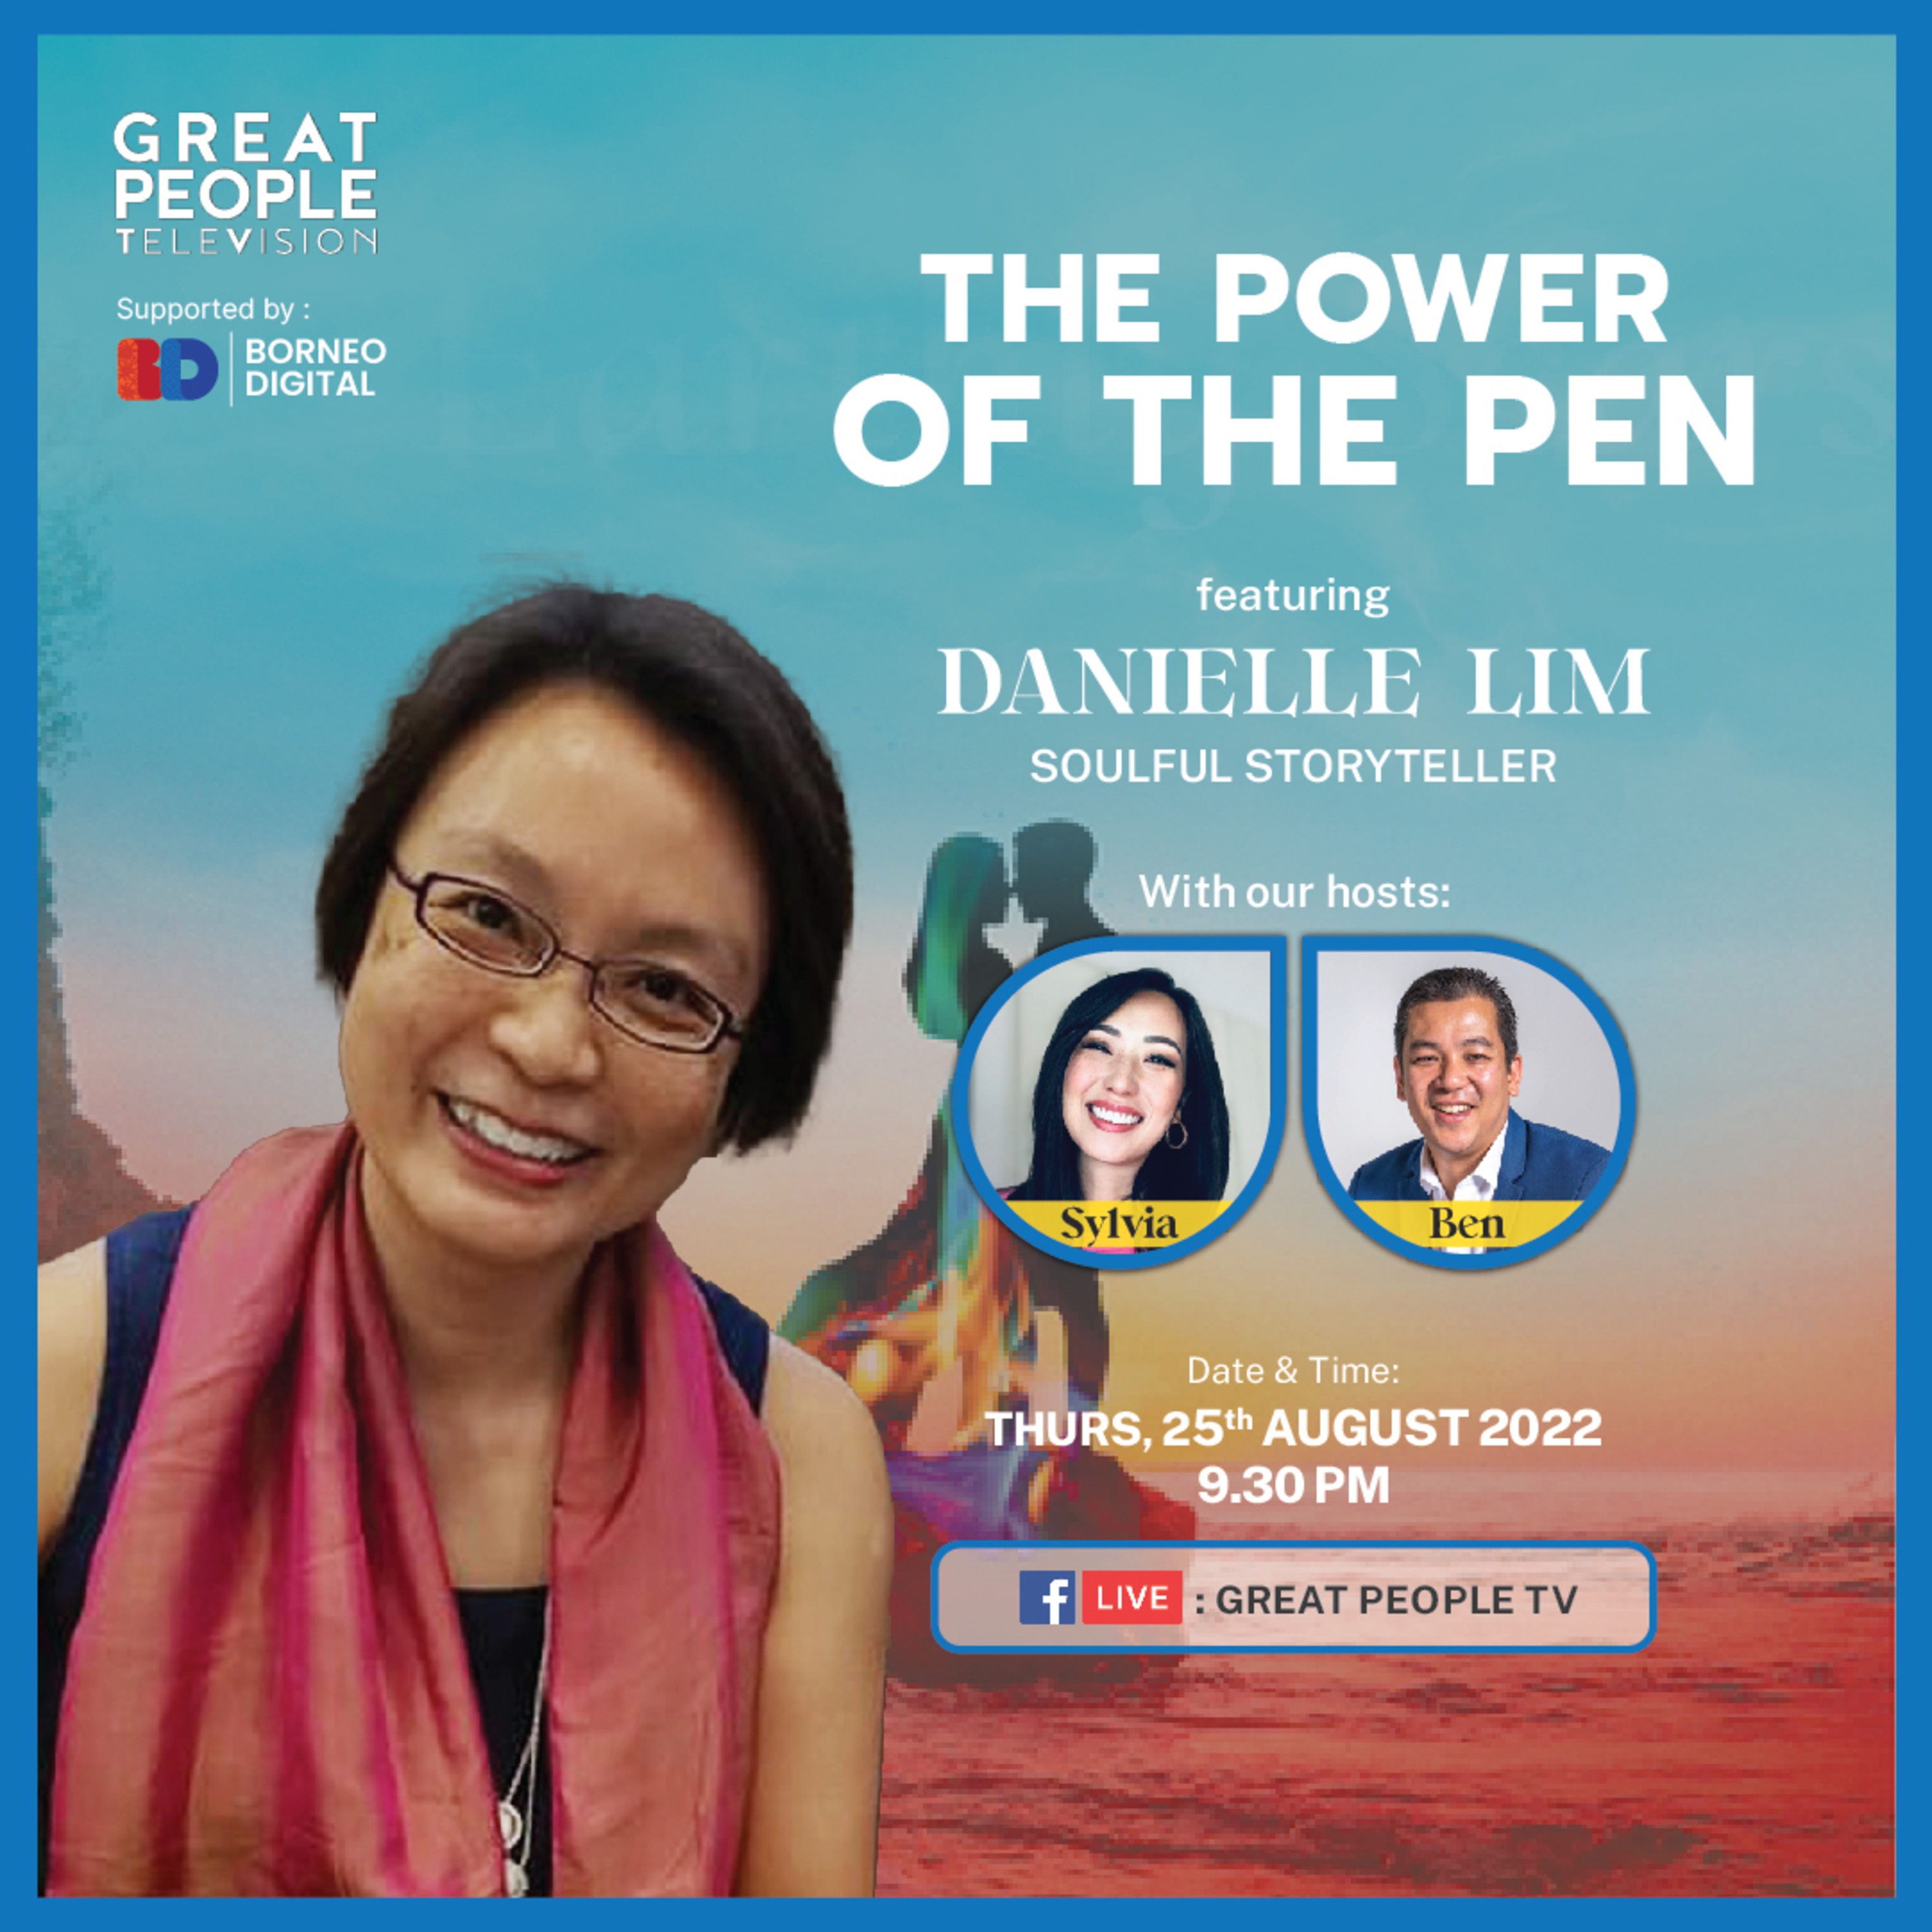 The Power Of The Pen - Danielle Lim